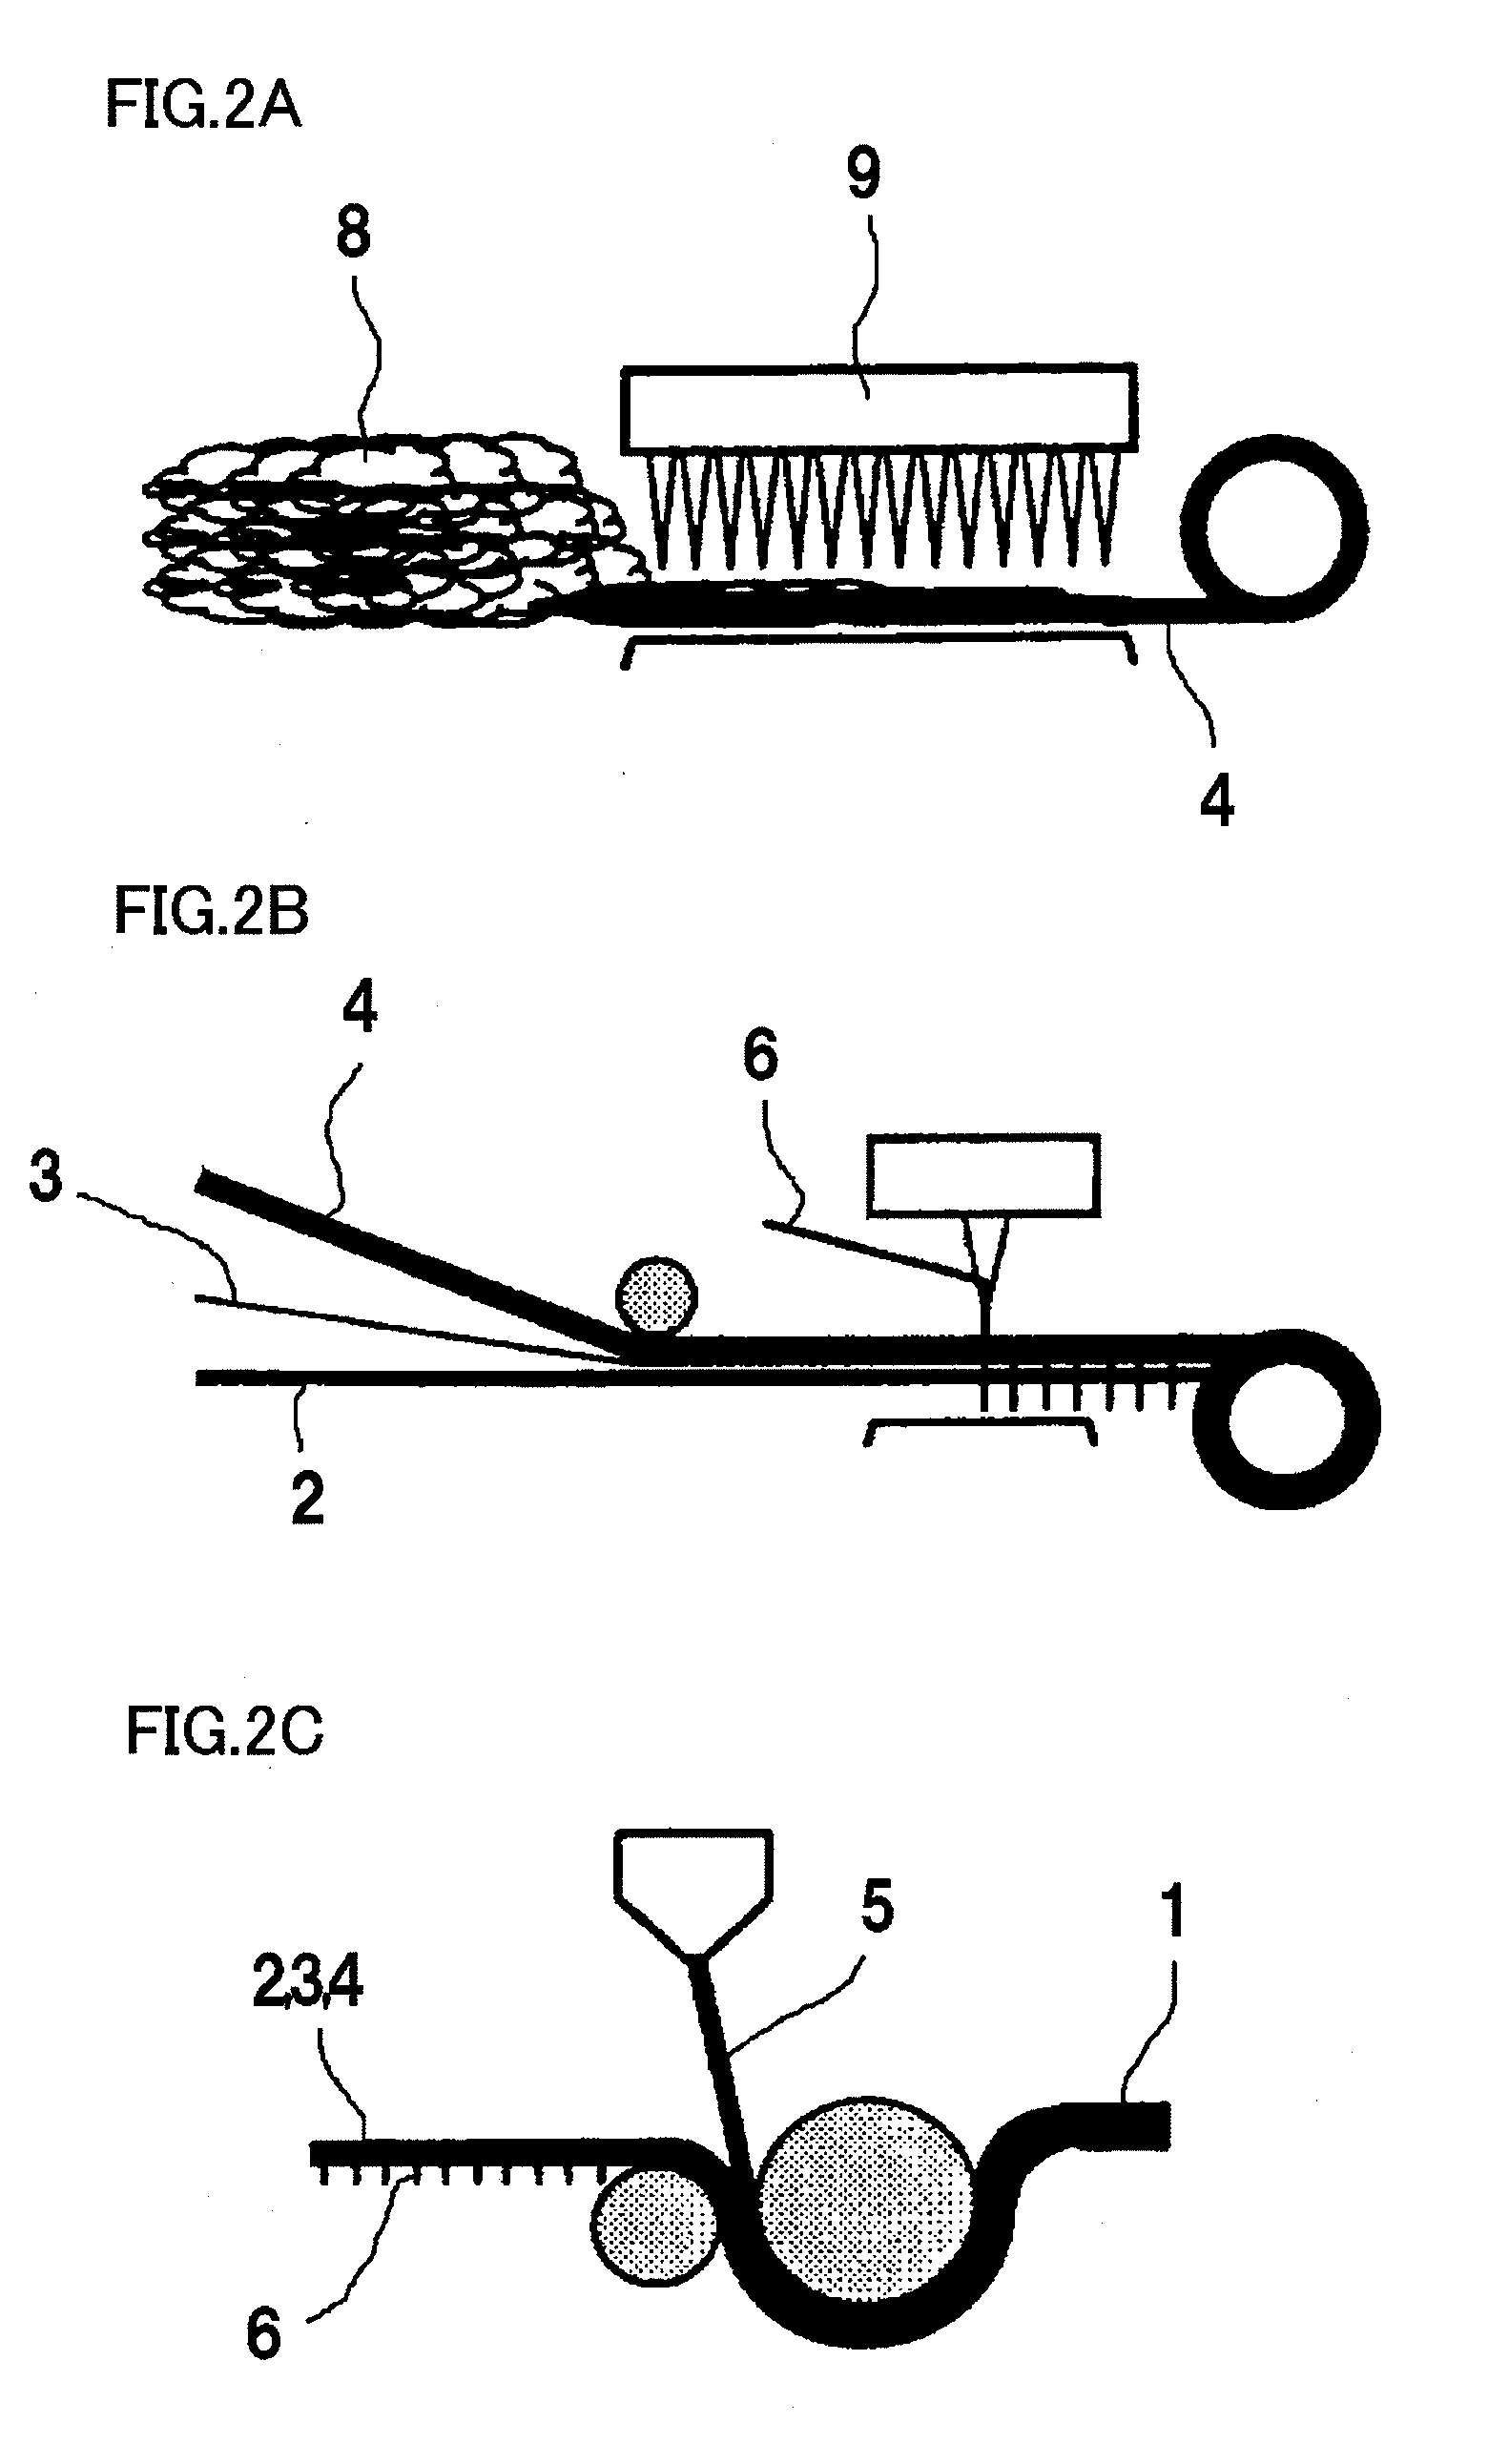 Carpet and method of manufacture therefor